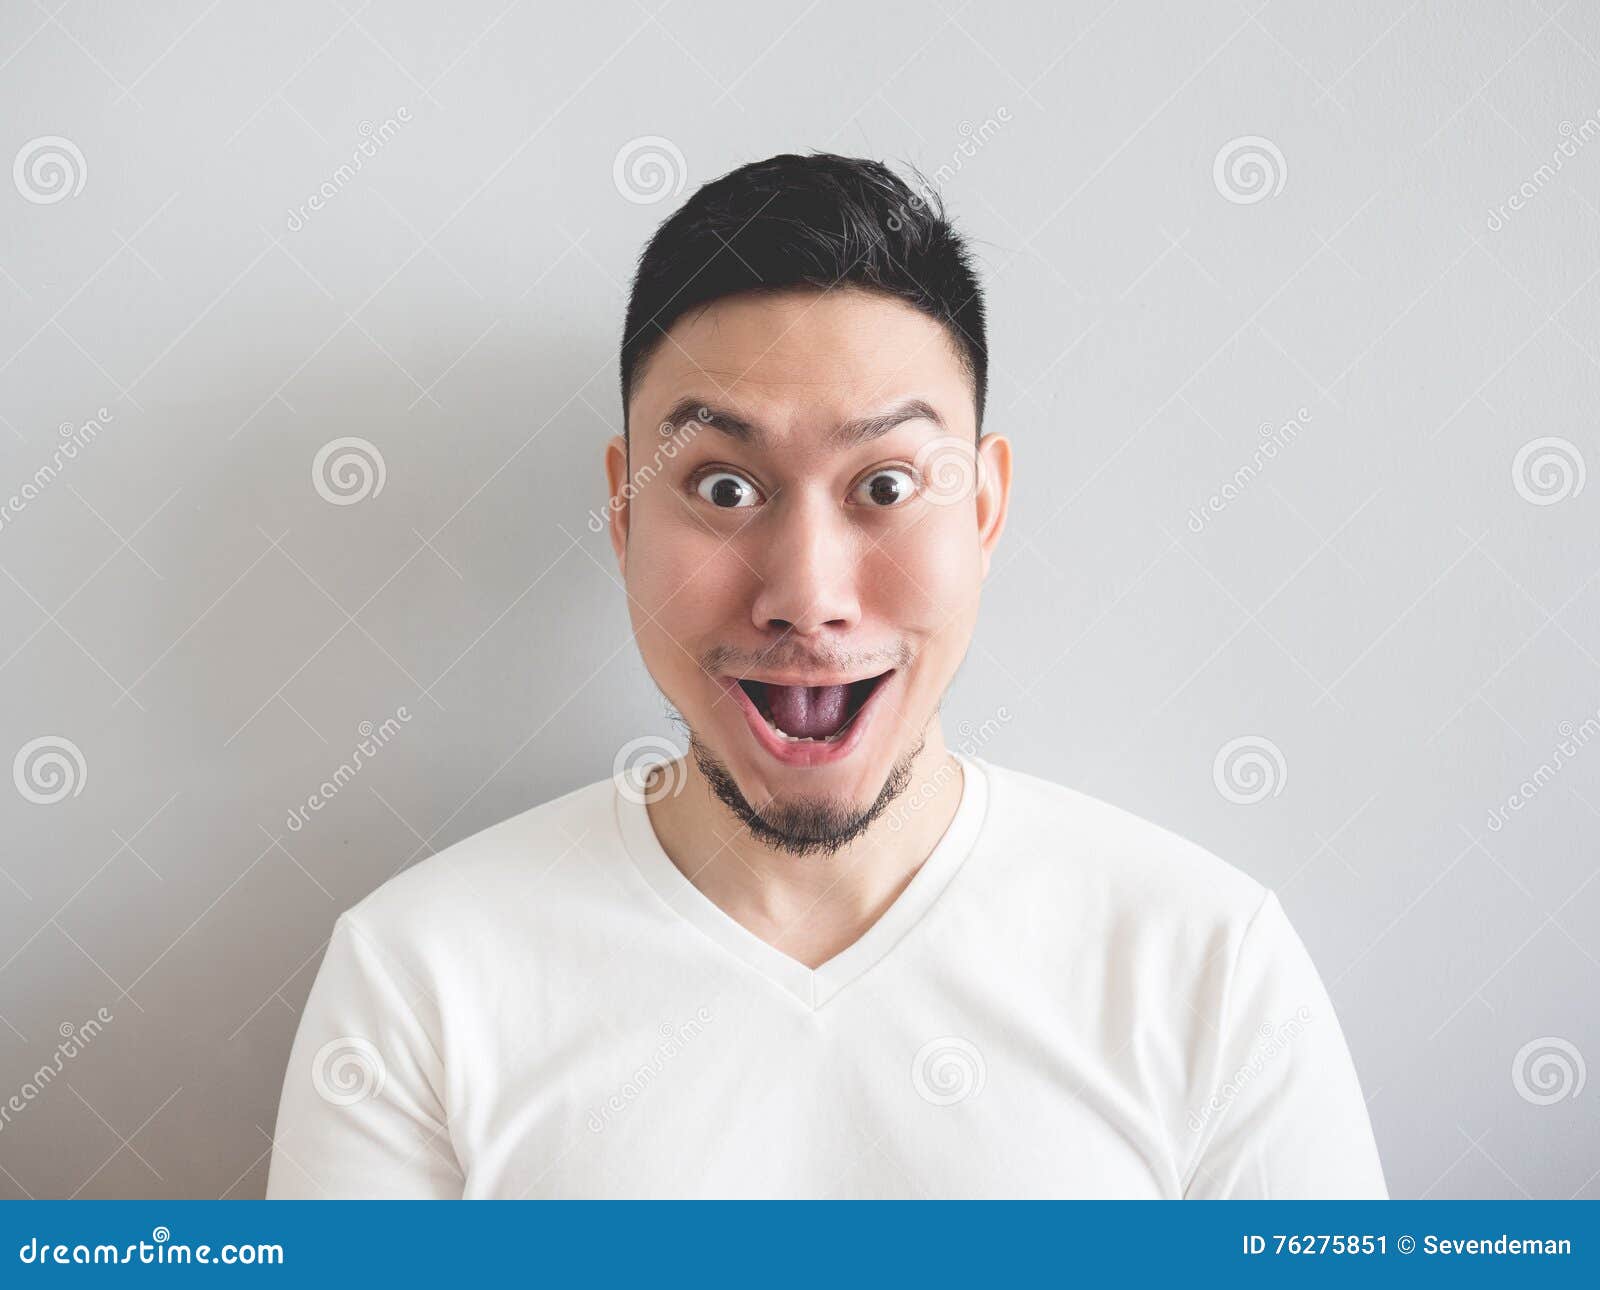 Man with Funny Shocked Face. Stock Image - Image of expression, excited:  76275851